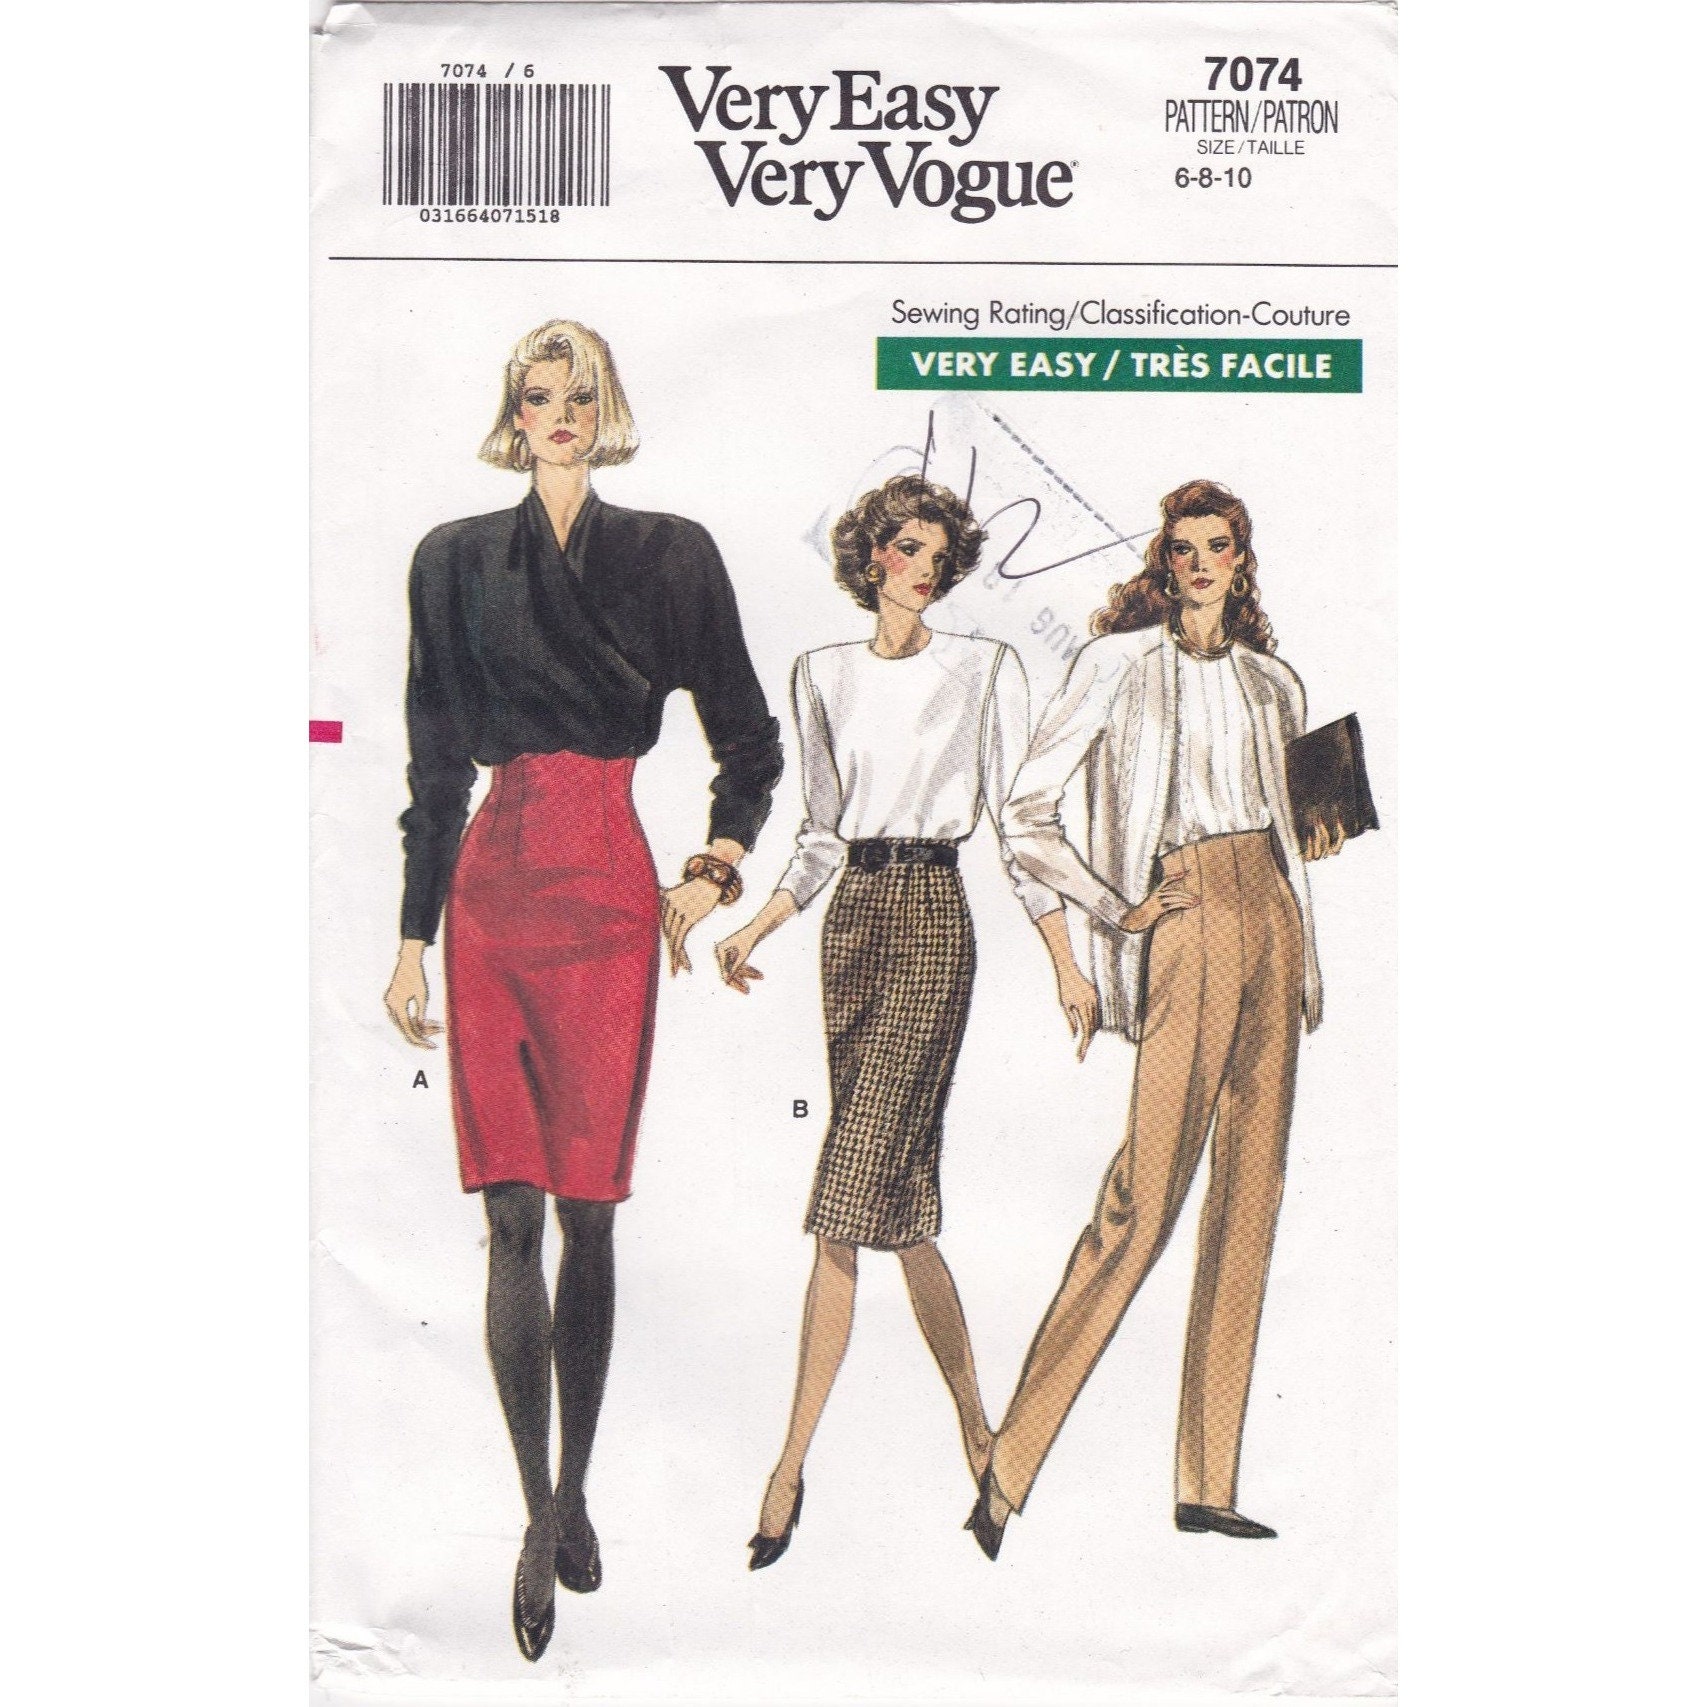 Mccall's 3138 Sewing Pattern for Misses' Jumpsuit, Short Romper and Button  Front Skirt, 1980s Vintage Size 8 UNCUT Pattern in Factory Folds 